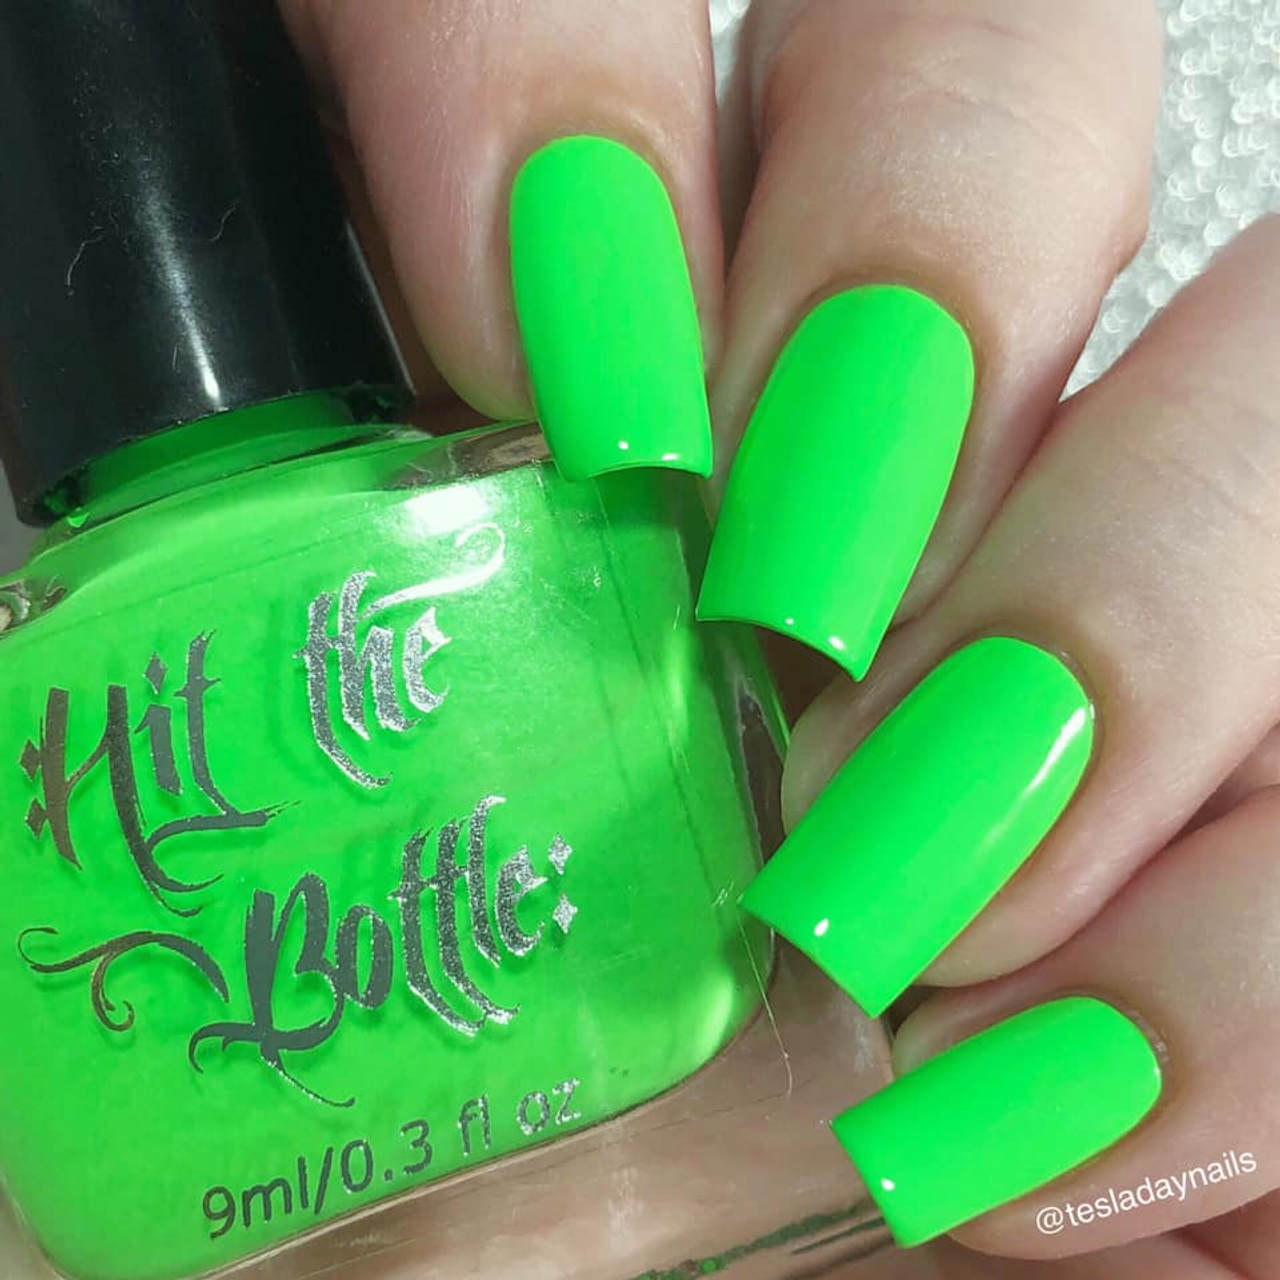 Best Acrylic Neon Nail Art Looks, According to Our Editors | Makeup.com